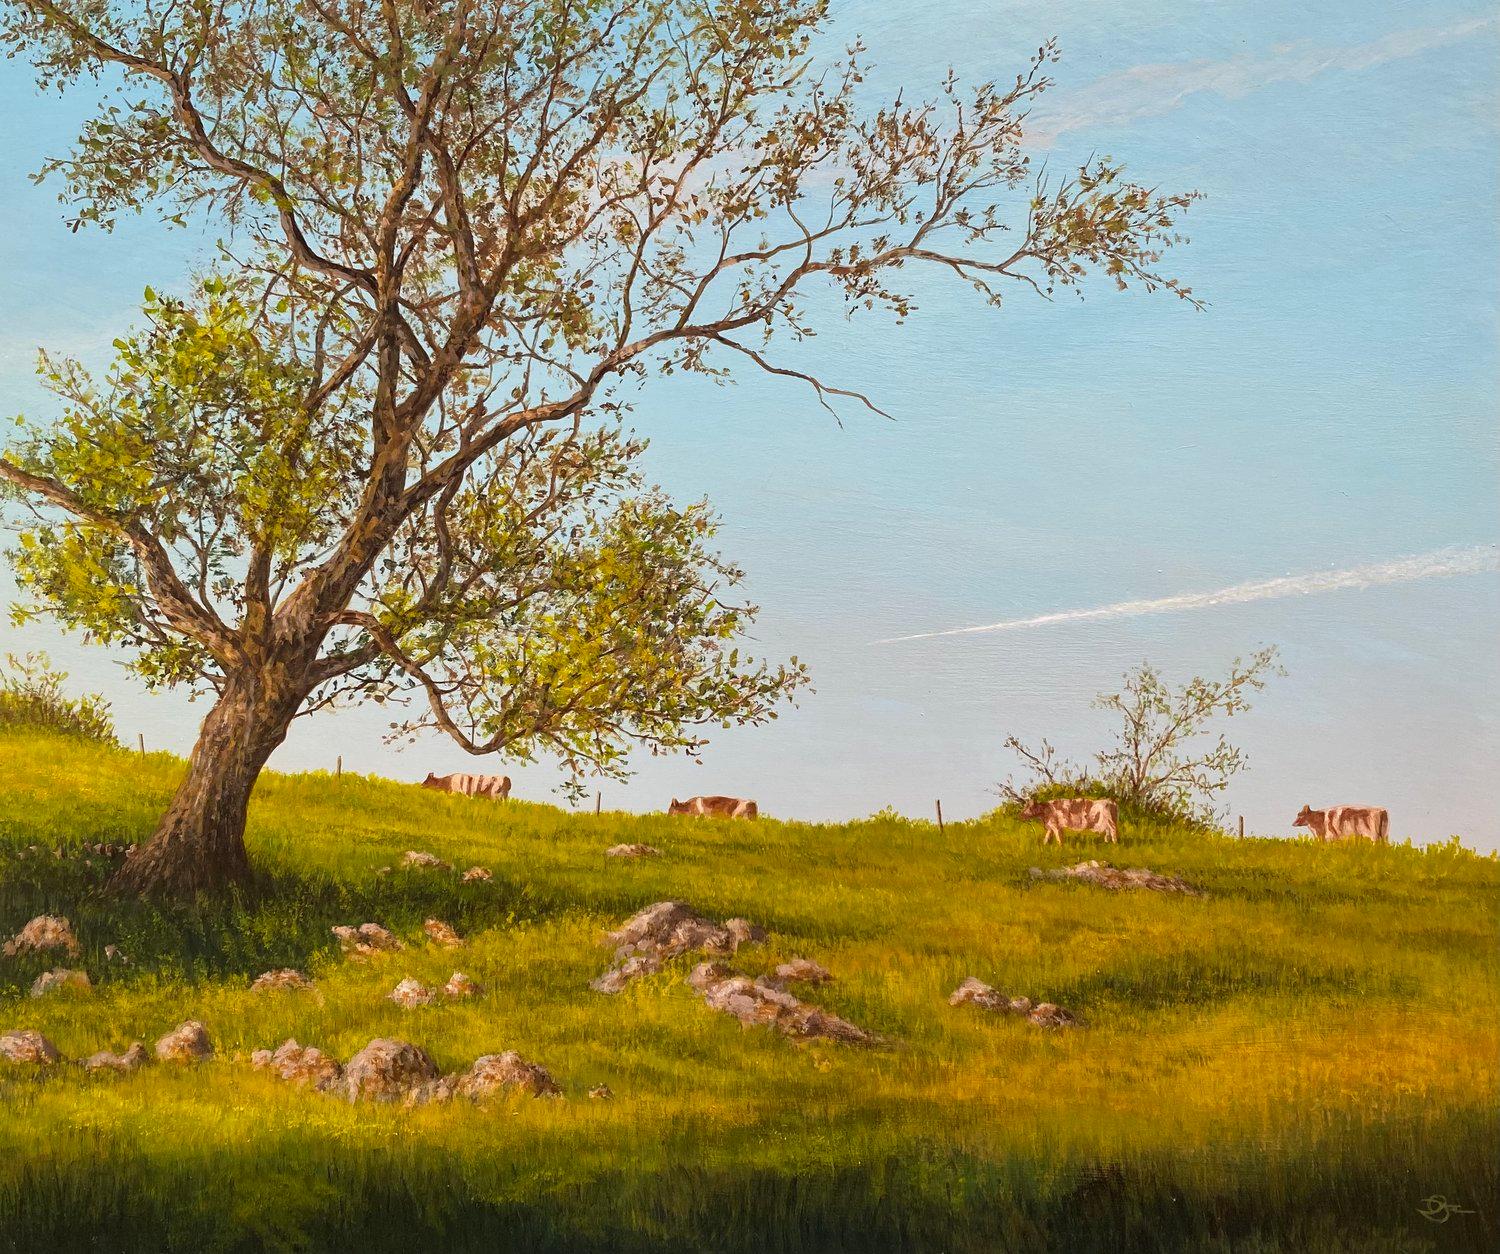 This piece, "Afternoon Parade", is a 13x15 acrylic painting on board by artist Del Bourree Bach featuring a peak into quiet pasture with bright blue skies above. A line of cattle follow each other one by one through a rolling green landscape.

About